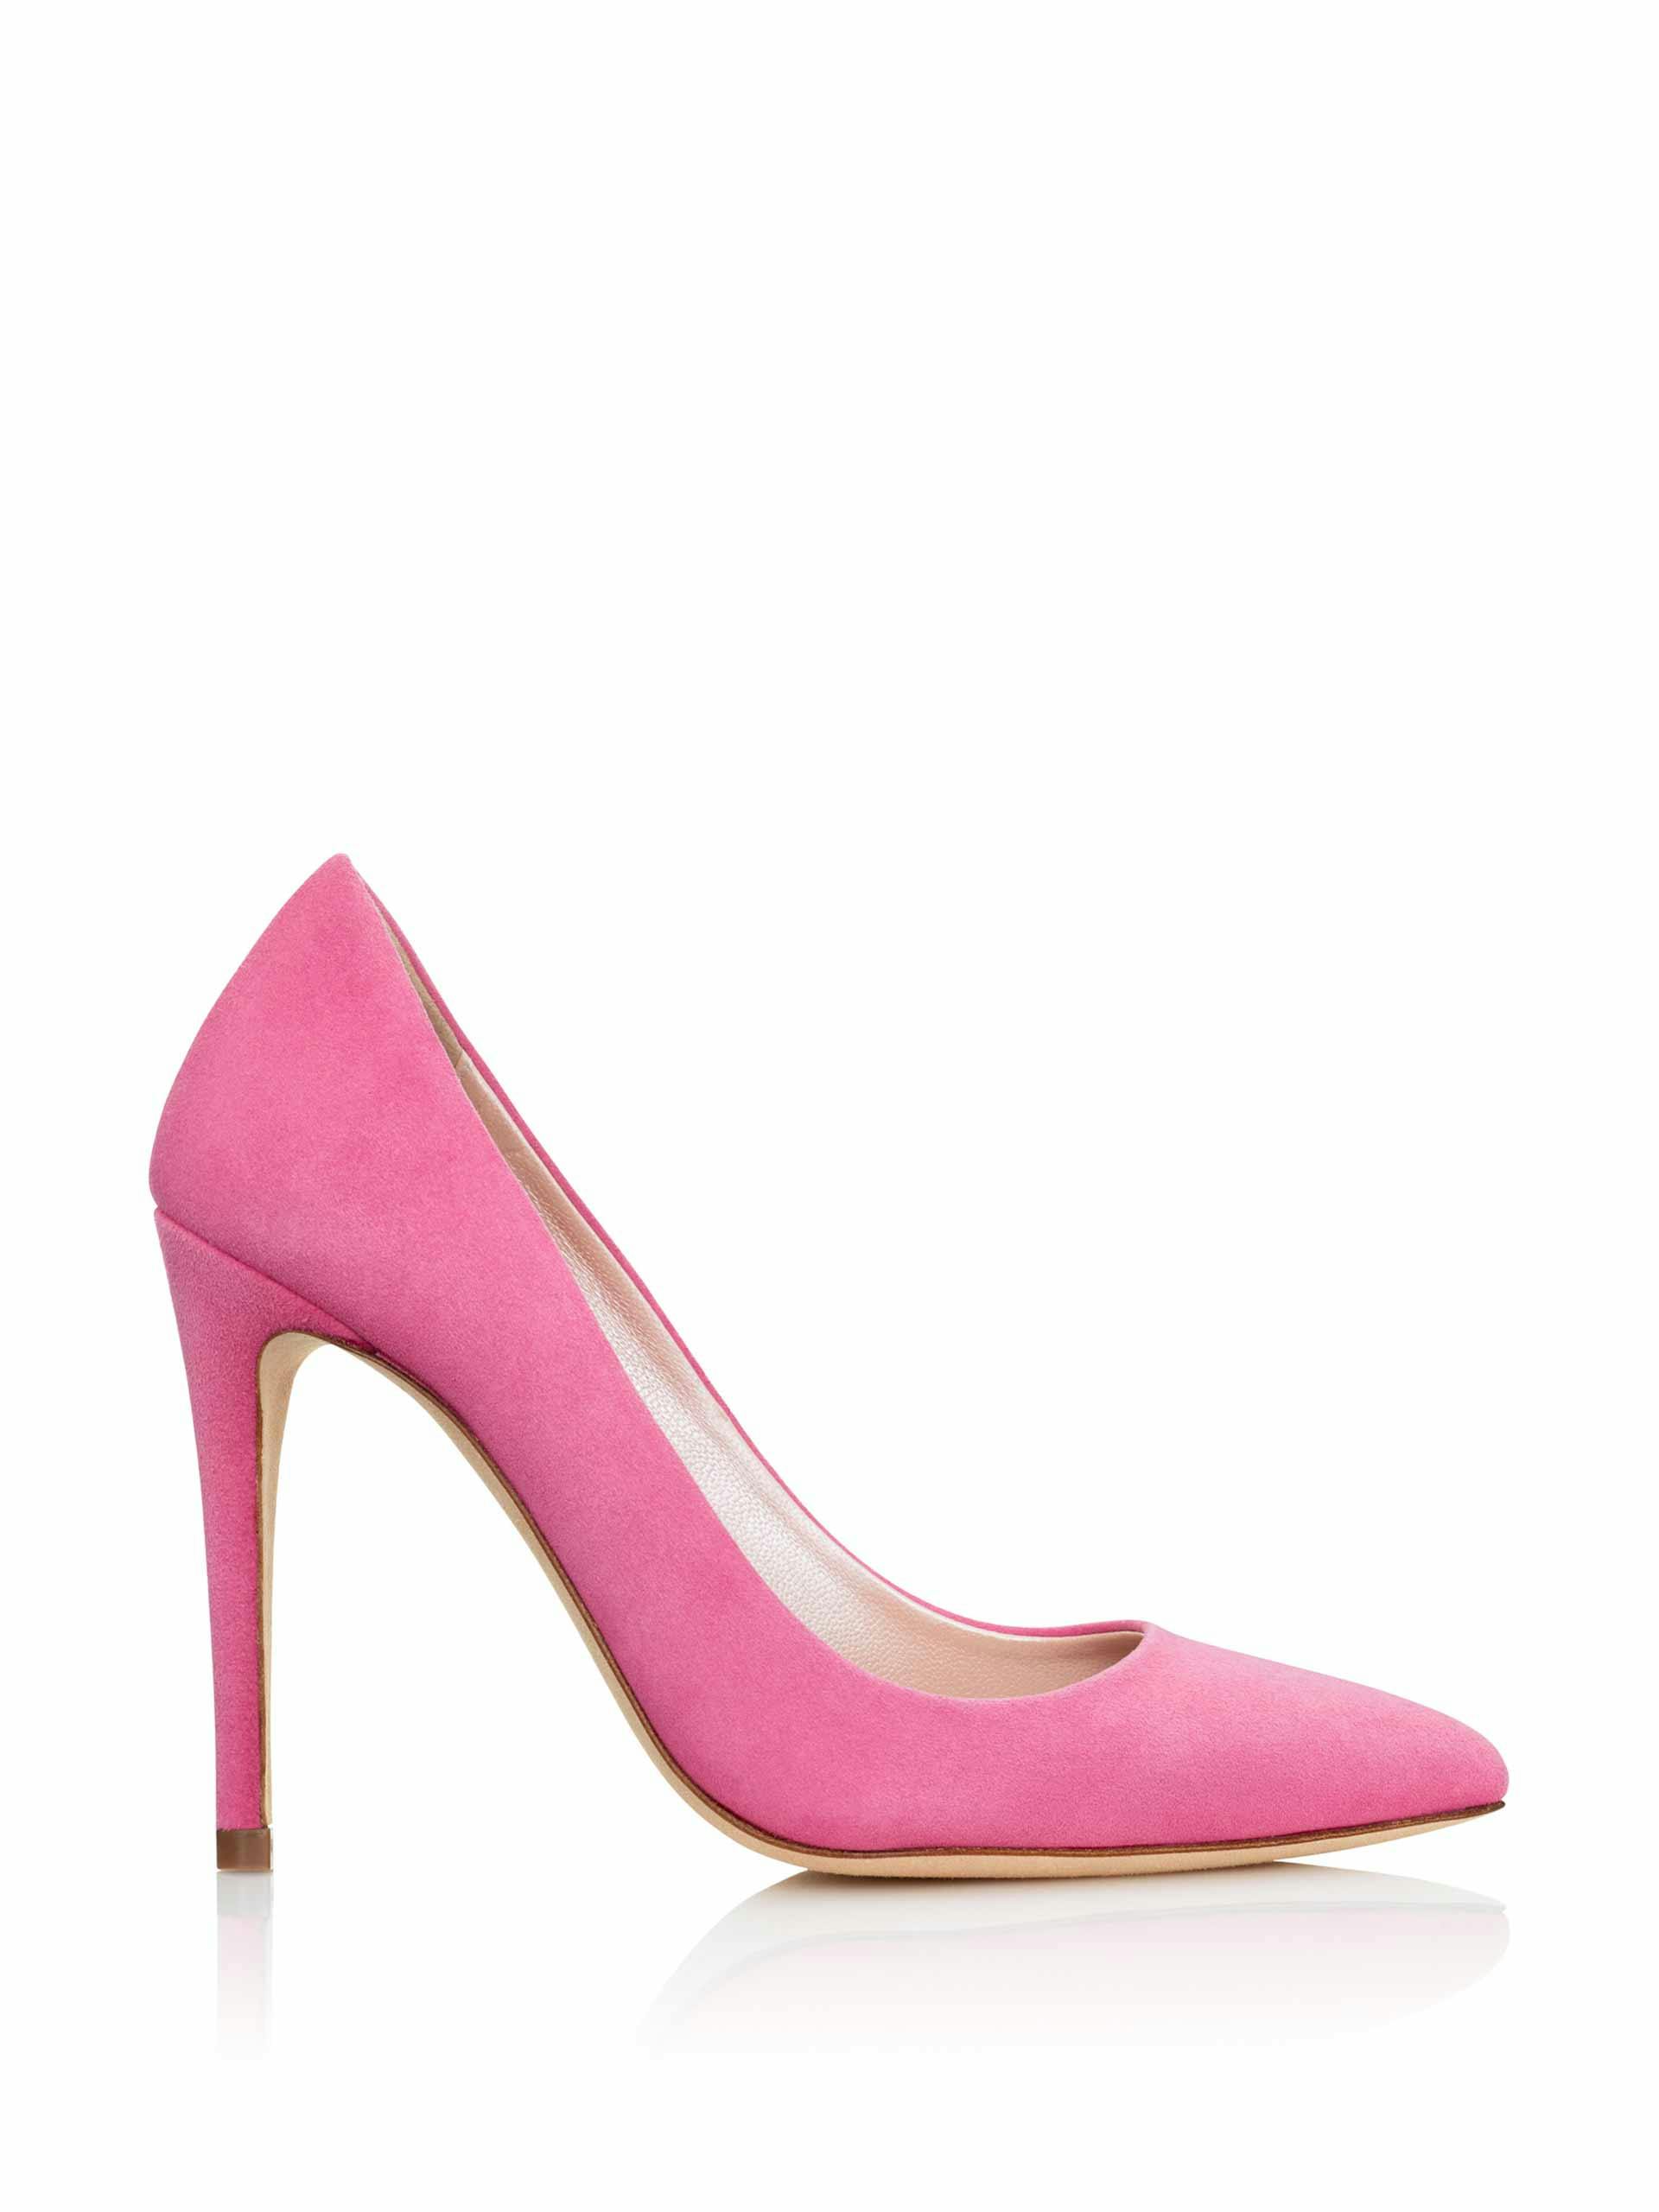 Bright pink pointed high heel court shoe